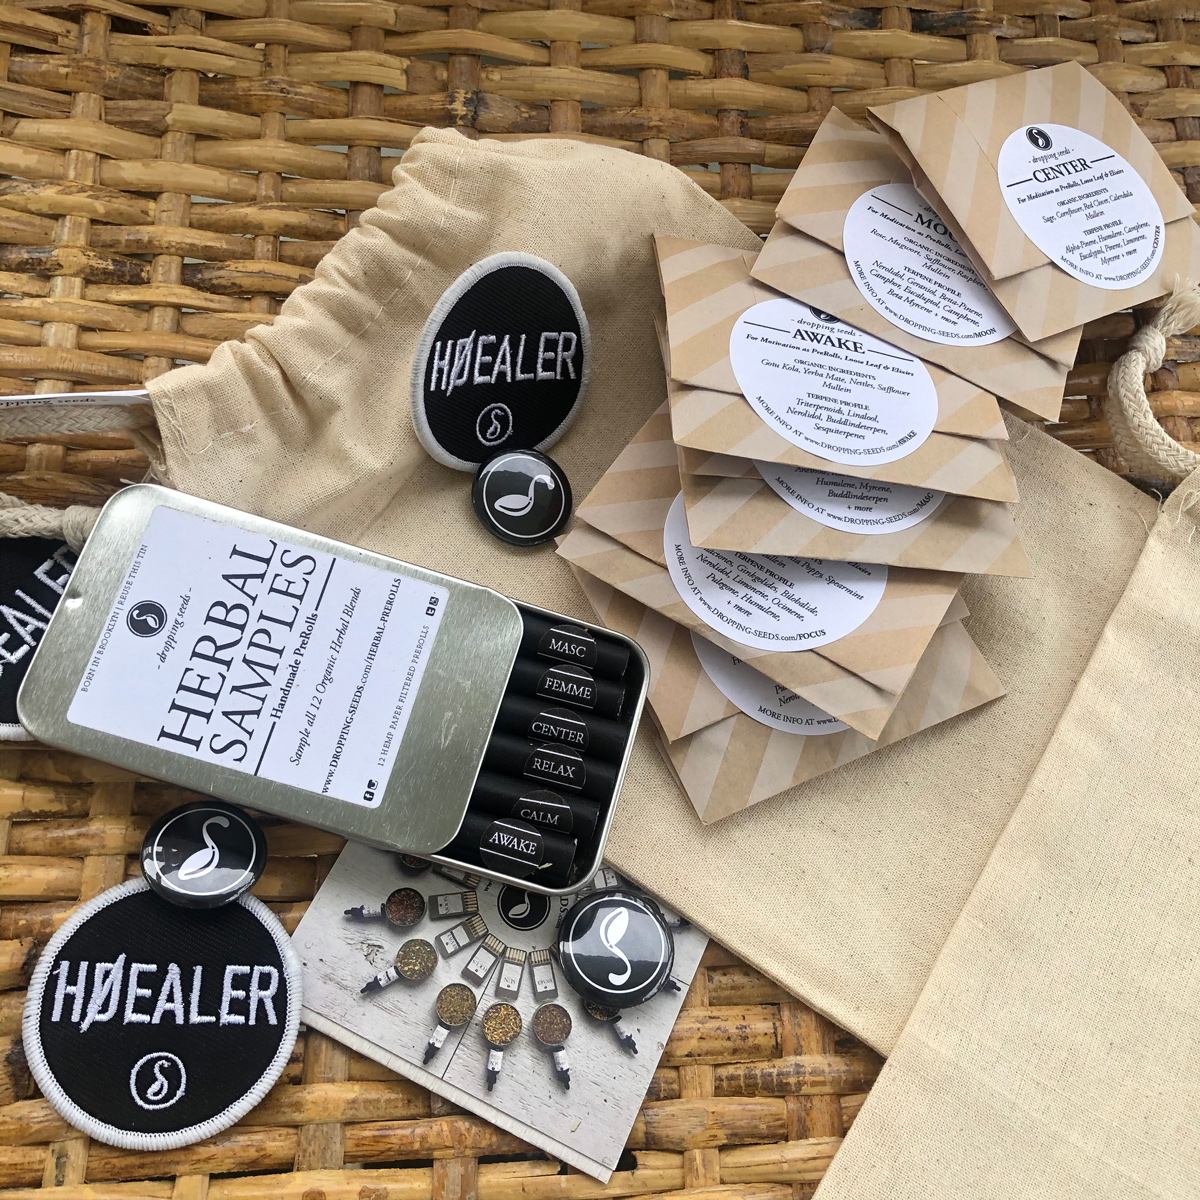 Smoking herb sampler pouch with Healer/Dealer social healing justice promo patch and pin.